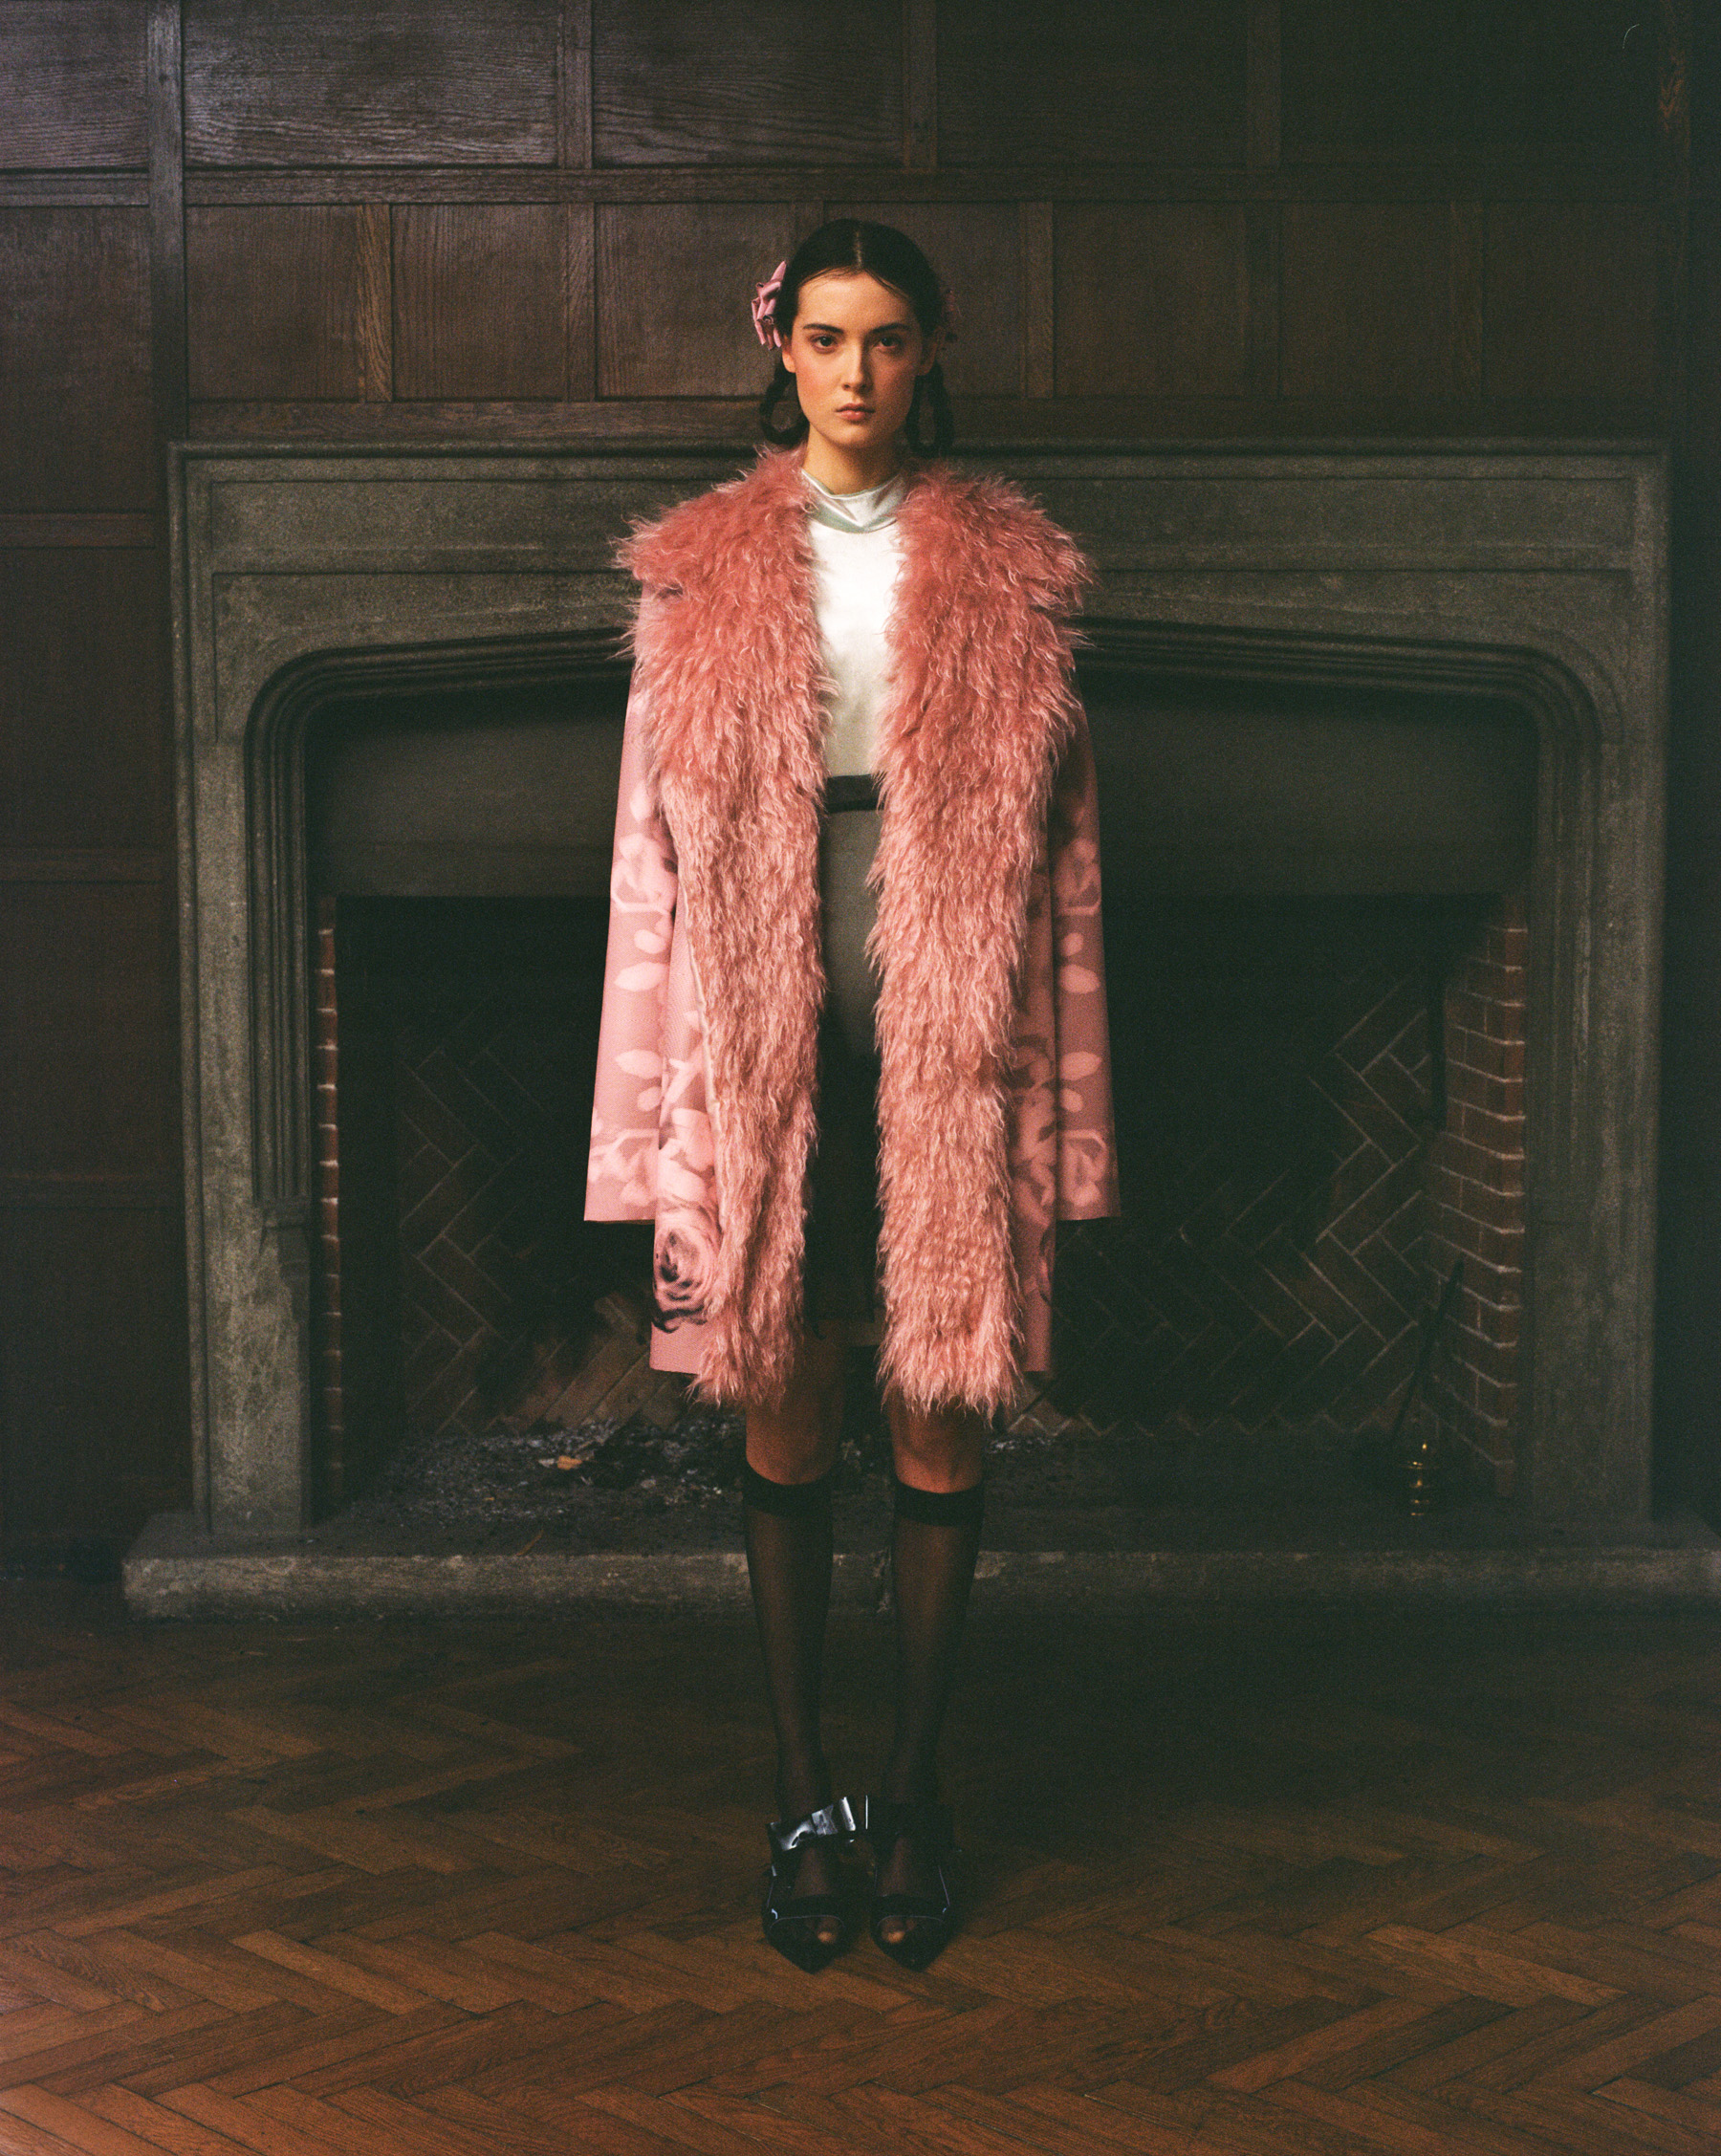 Female model with pink jacket